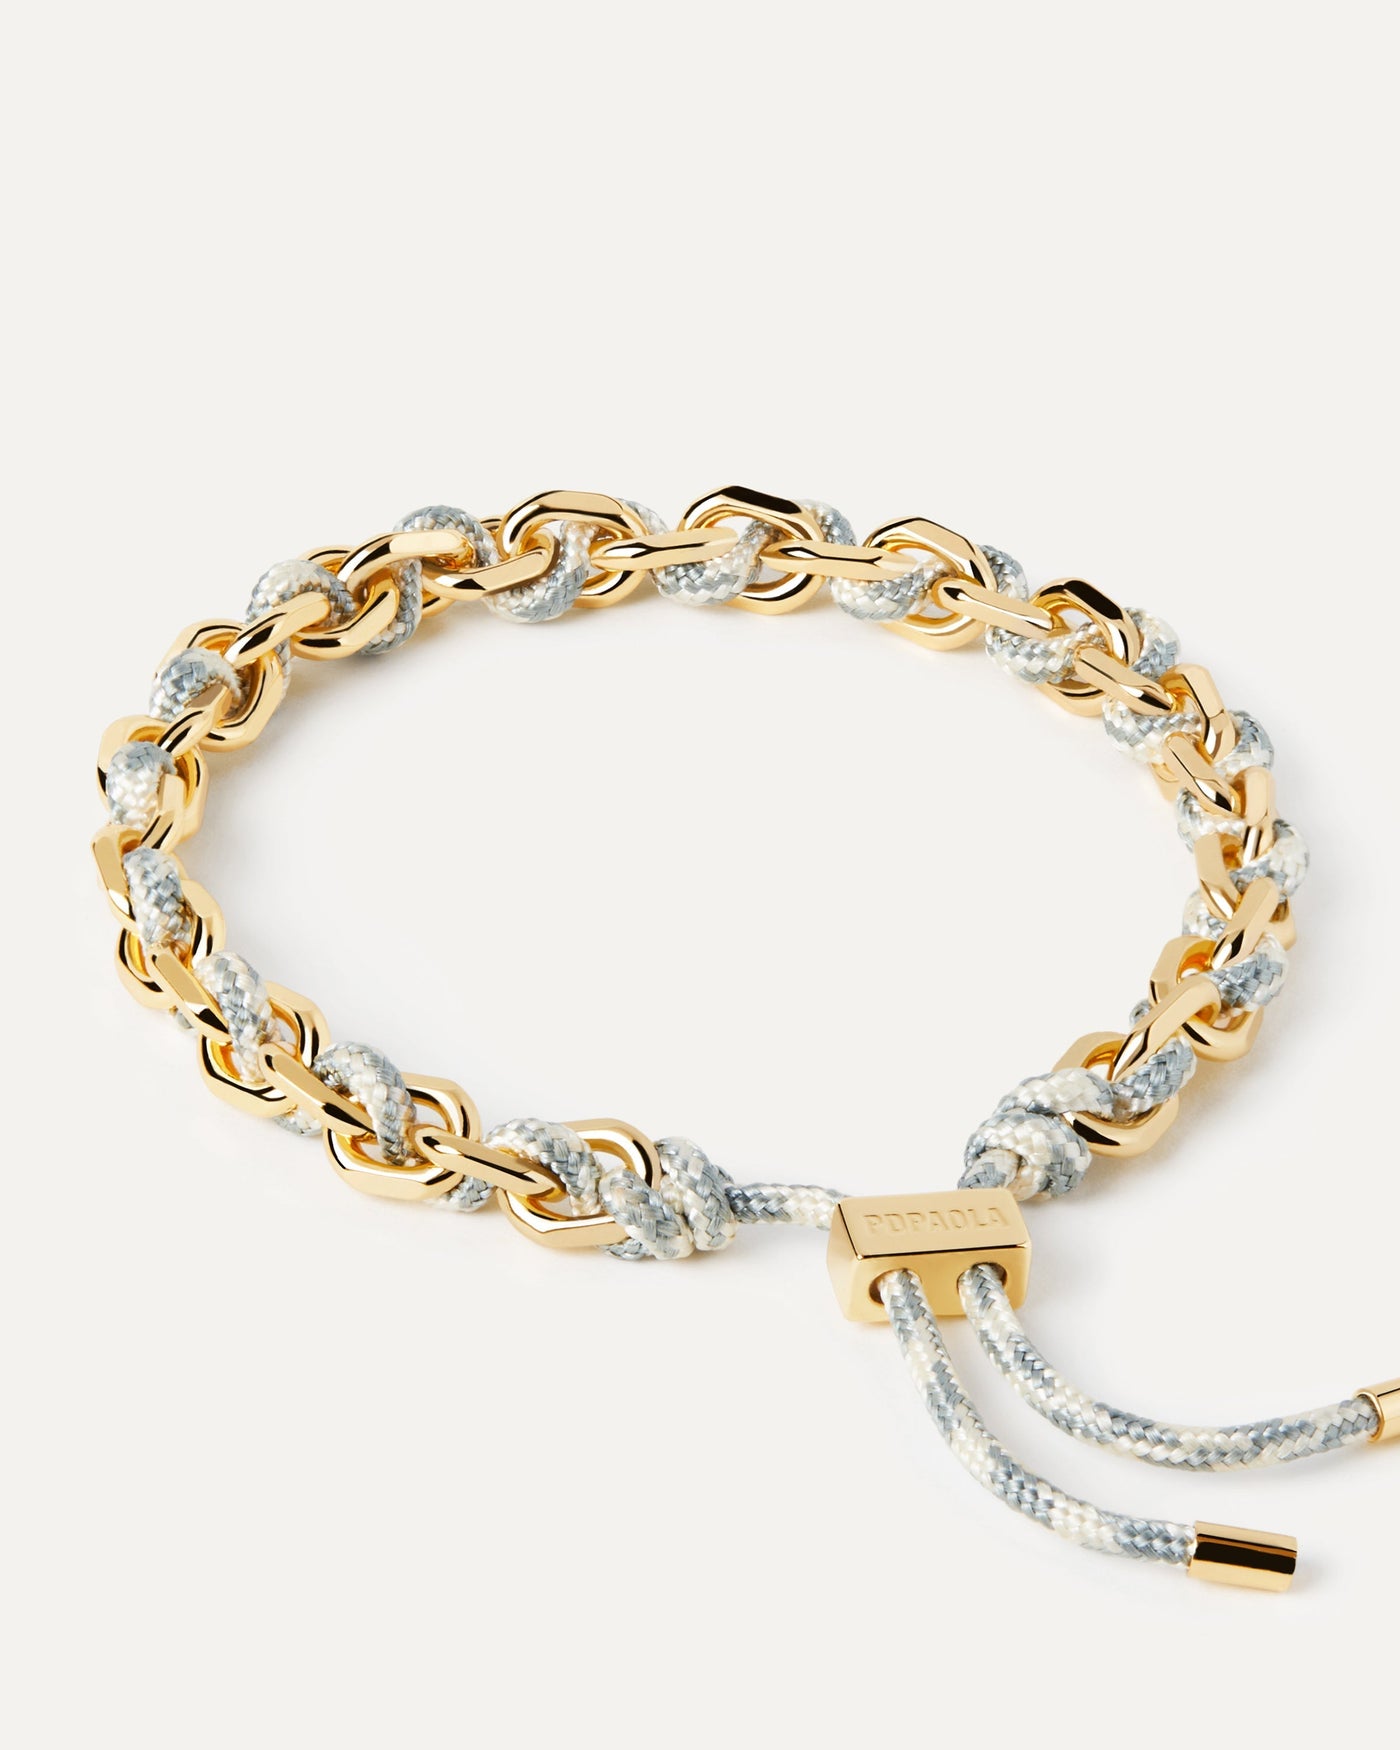 2023 Selection | Sky Rope and Chain Bracelet. Golden chain bracelet with a blue and white rope adjustable sliding clasp. Get the latest arrival from PDPAOLA. Place your order safely and get this Best Seller. Free Shipping.